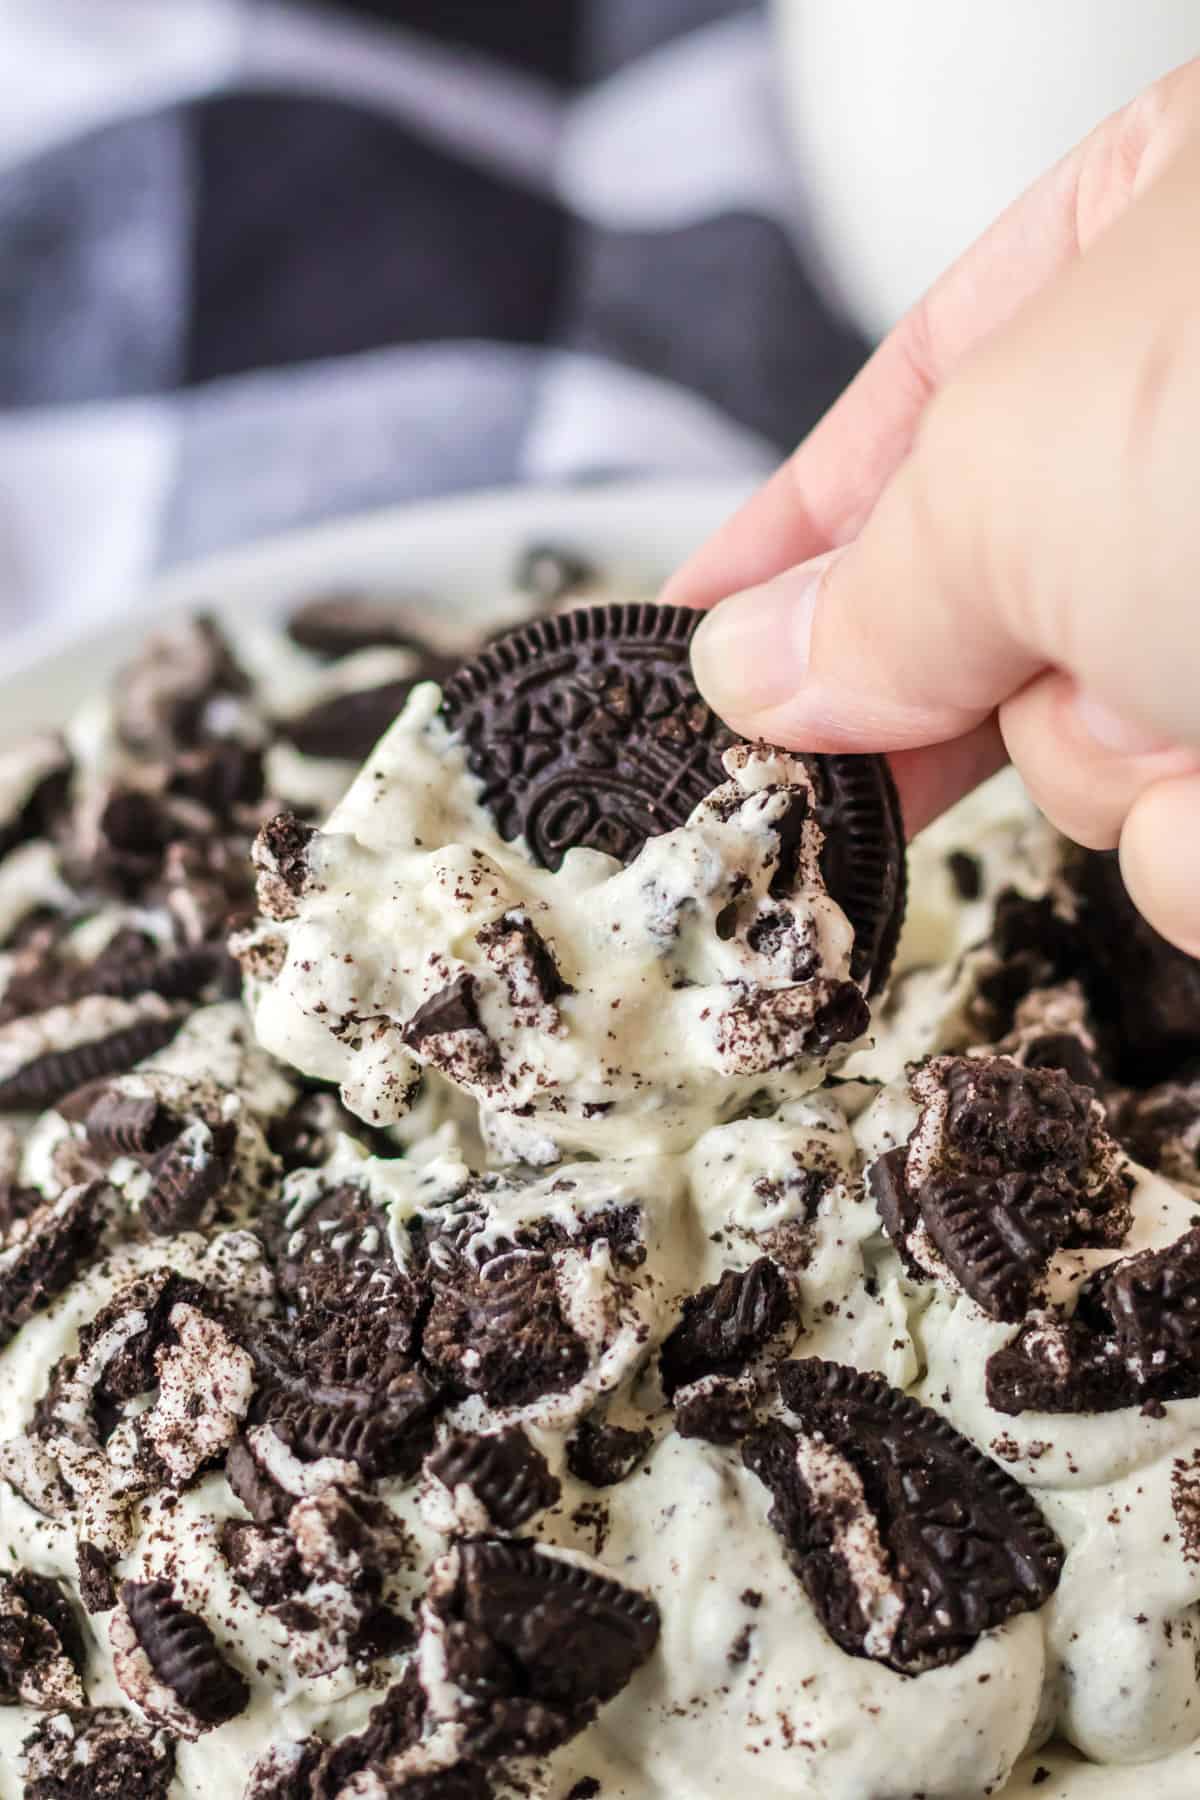 Oreo cookie being dipped in bowl of oreo fluff dip.